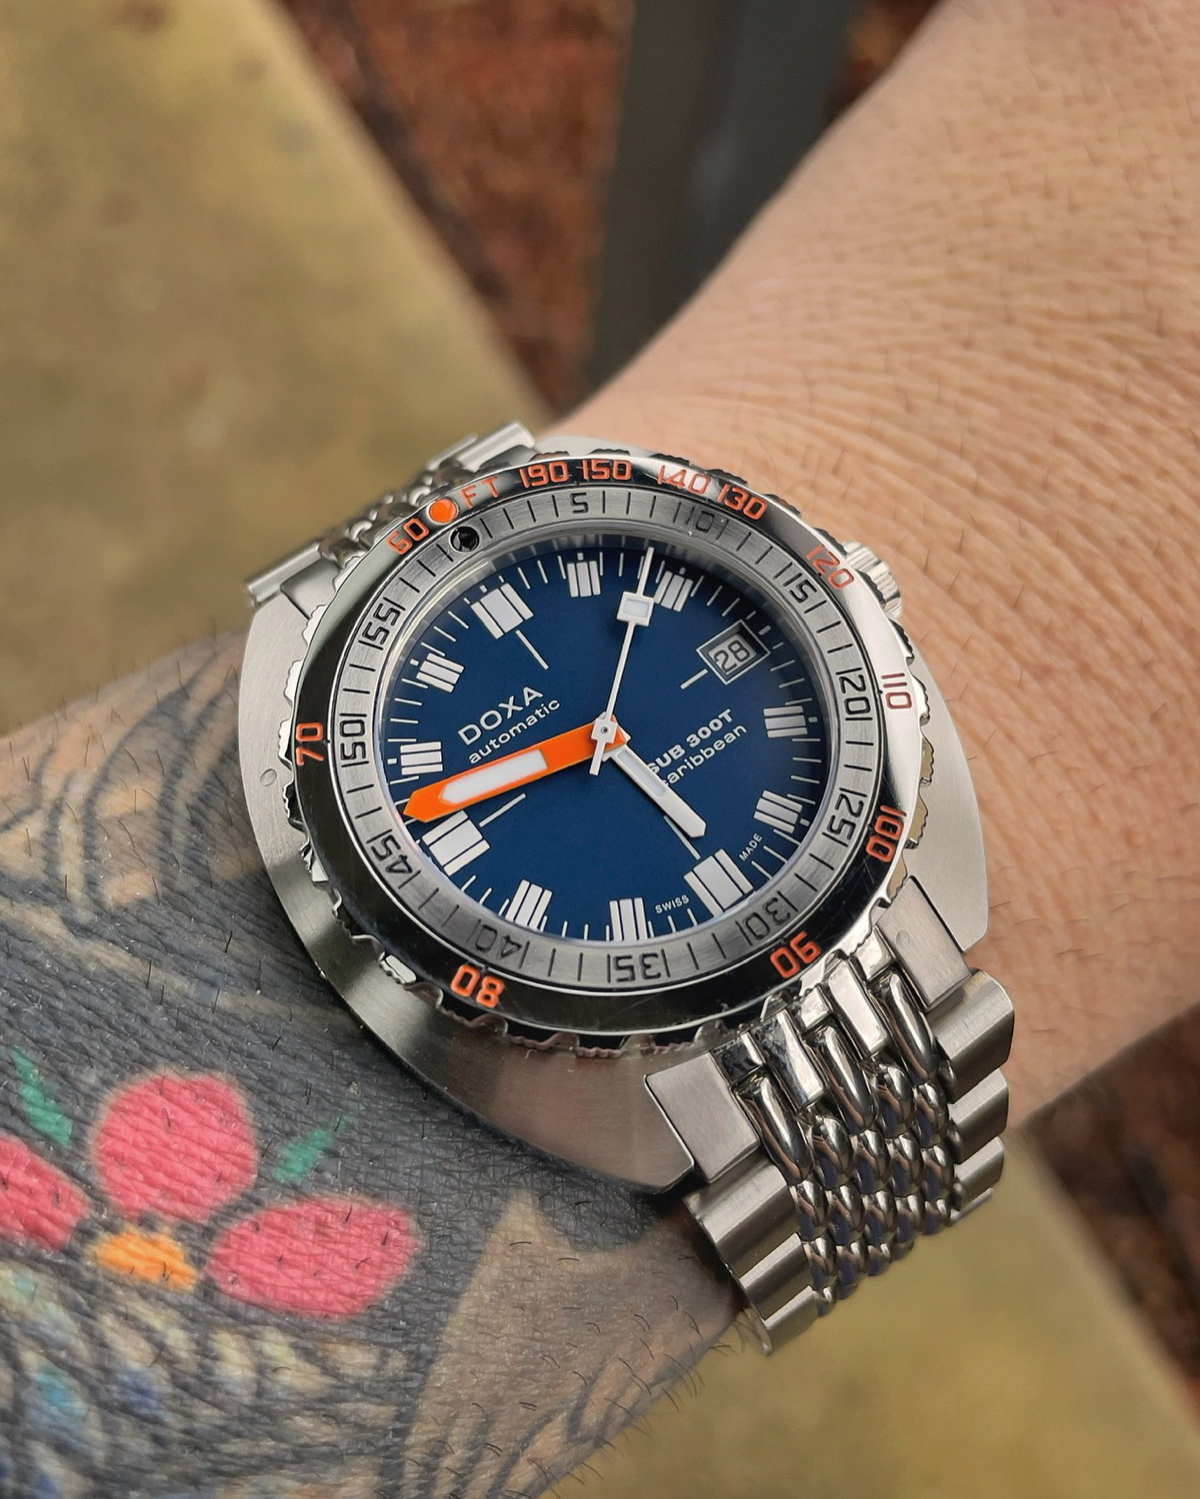 Owner Review: Doxa Sub 300T